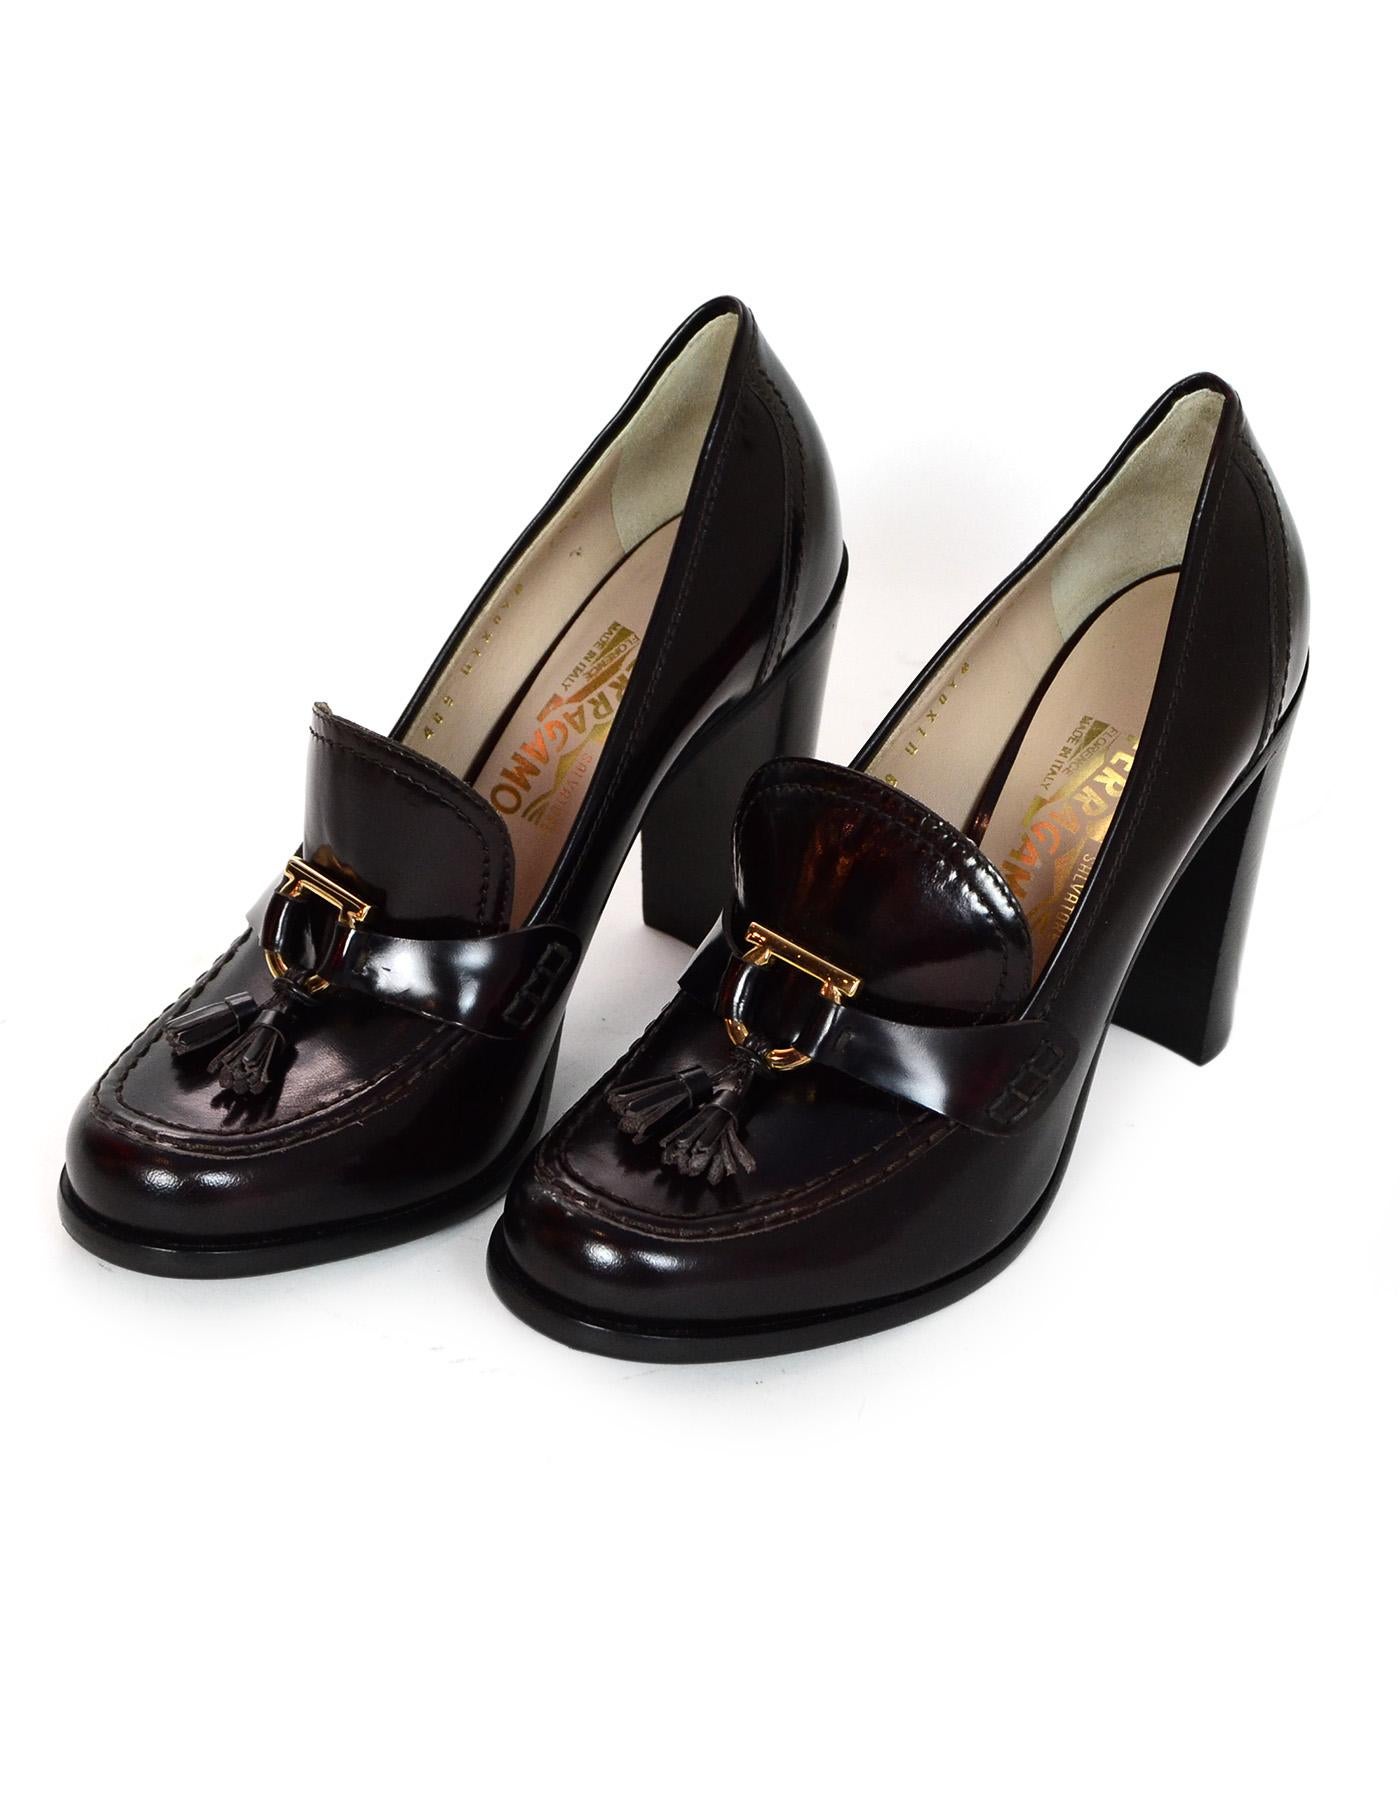 Salvatore Ferragamo Burgundy Glazed Leather Tassel Heeled Loafers Sz 7.5B

Made In: Italy
Color: Burgundy and black
Hardware: Goldtone
Materials: Glazed leather 
Closure/Opening: Slip on 
Overall Condition: Like new condition 

Measurements: 
Marked